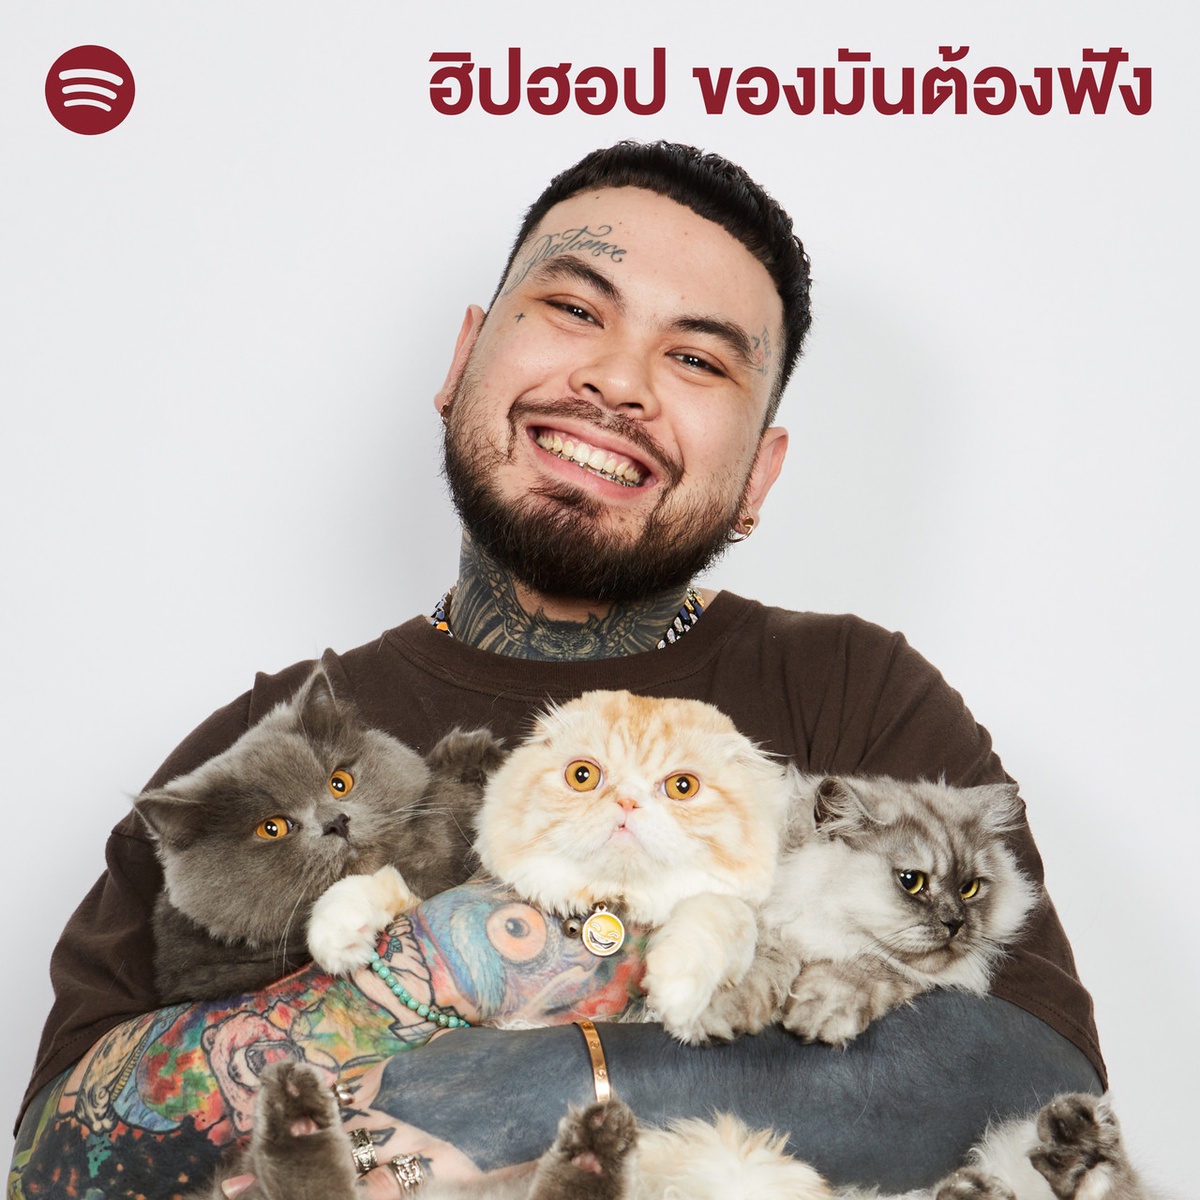 Meet the beloved pets of six Thai artists on Spotify playlists this National Pet Day